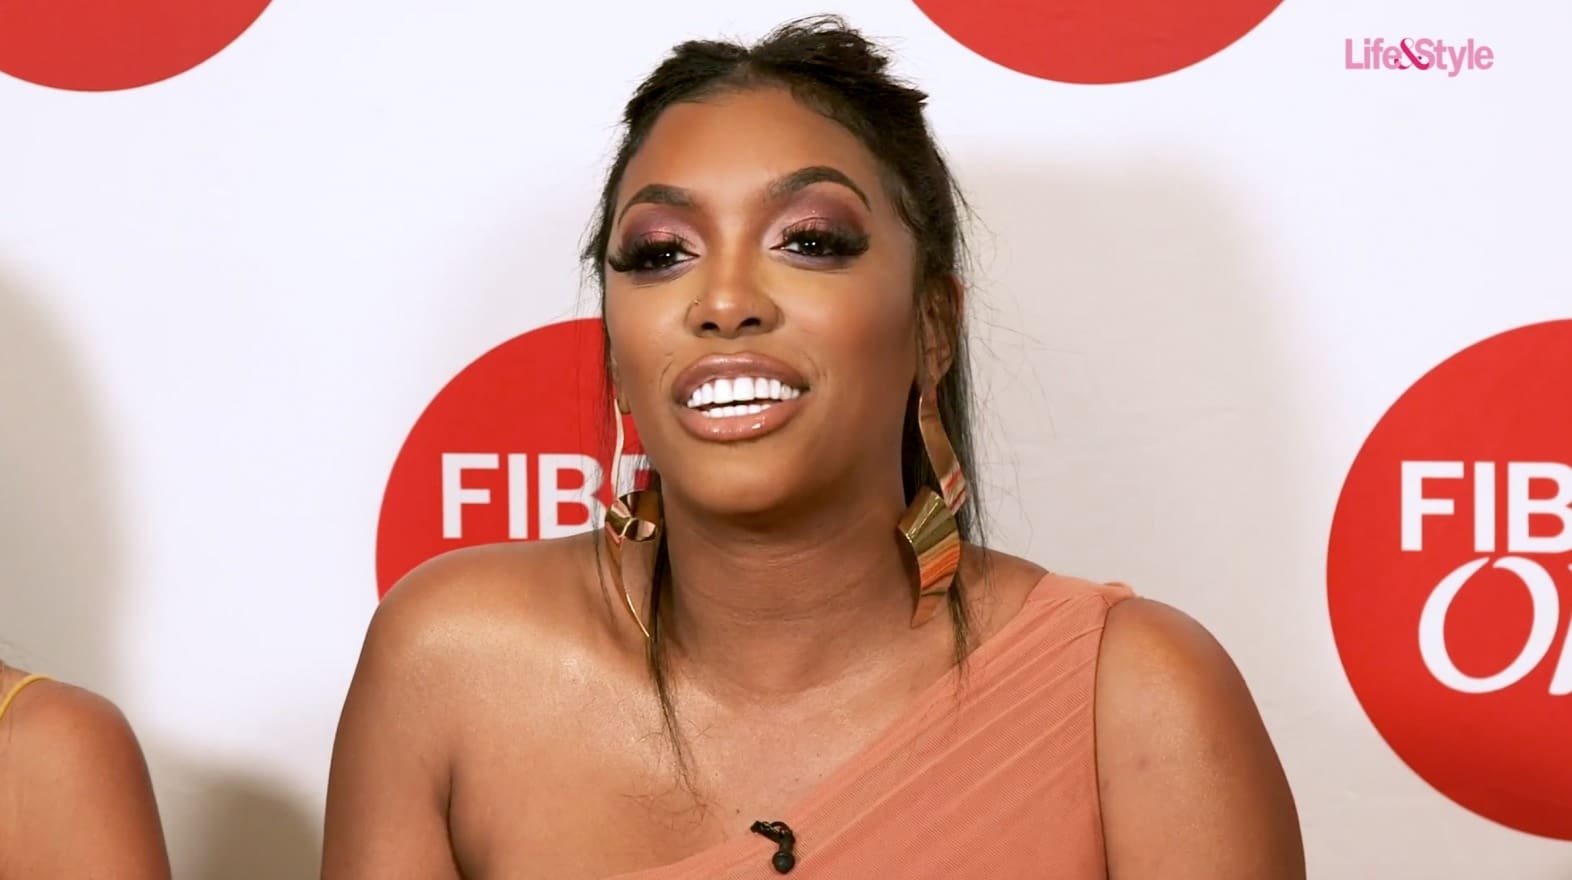 Porsha Williams Drops Her Clothes To Become An Extragavent Gift Under The Christmas Tree - See Her Photo Here